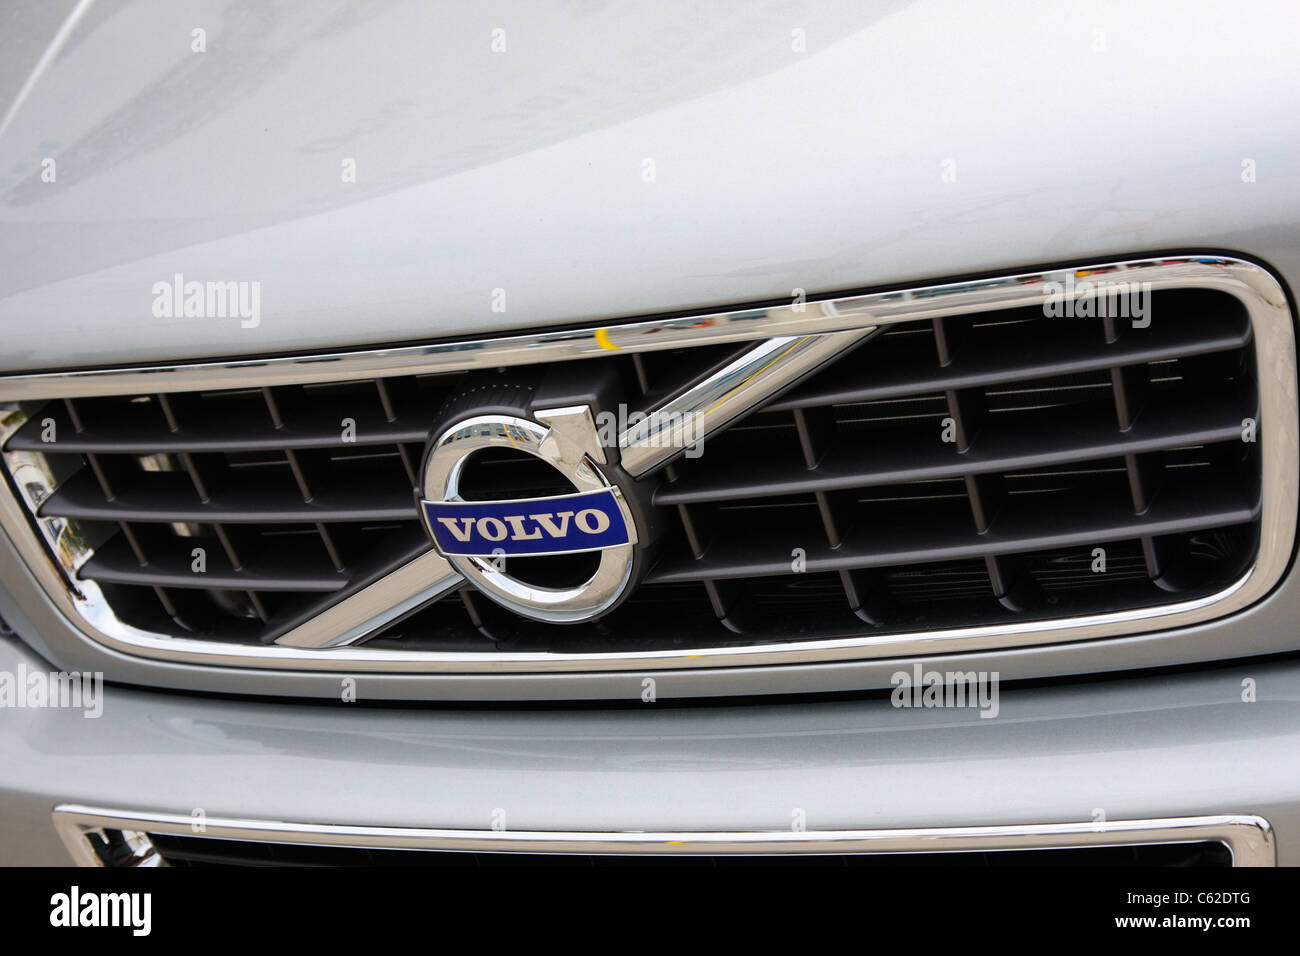 Volvo car front grill closeup Stock Photo